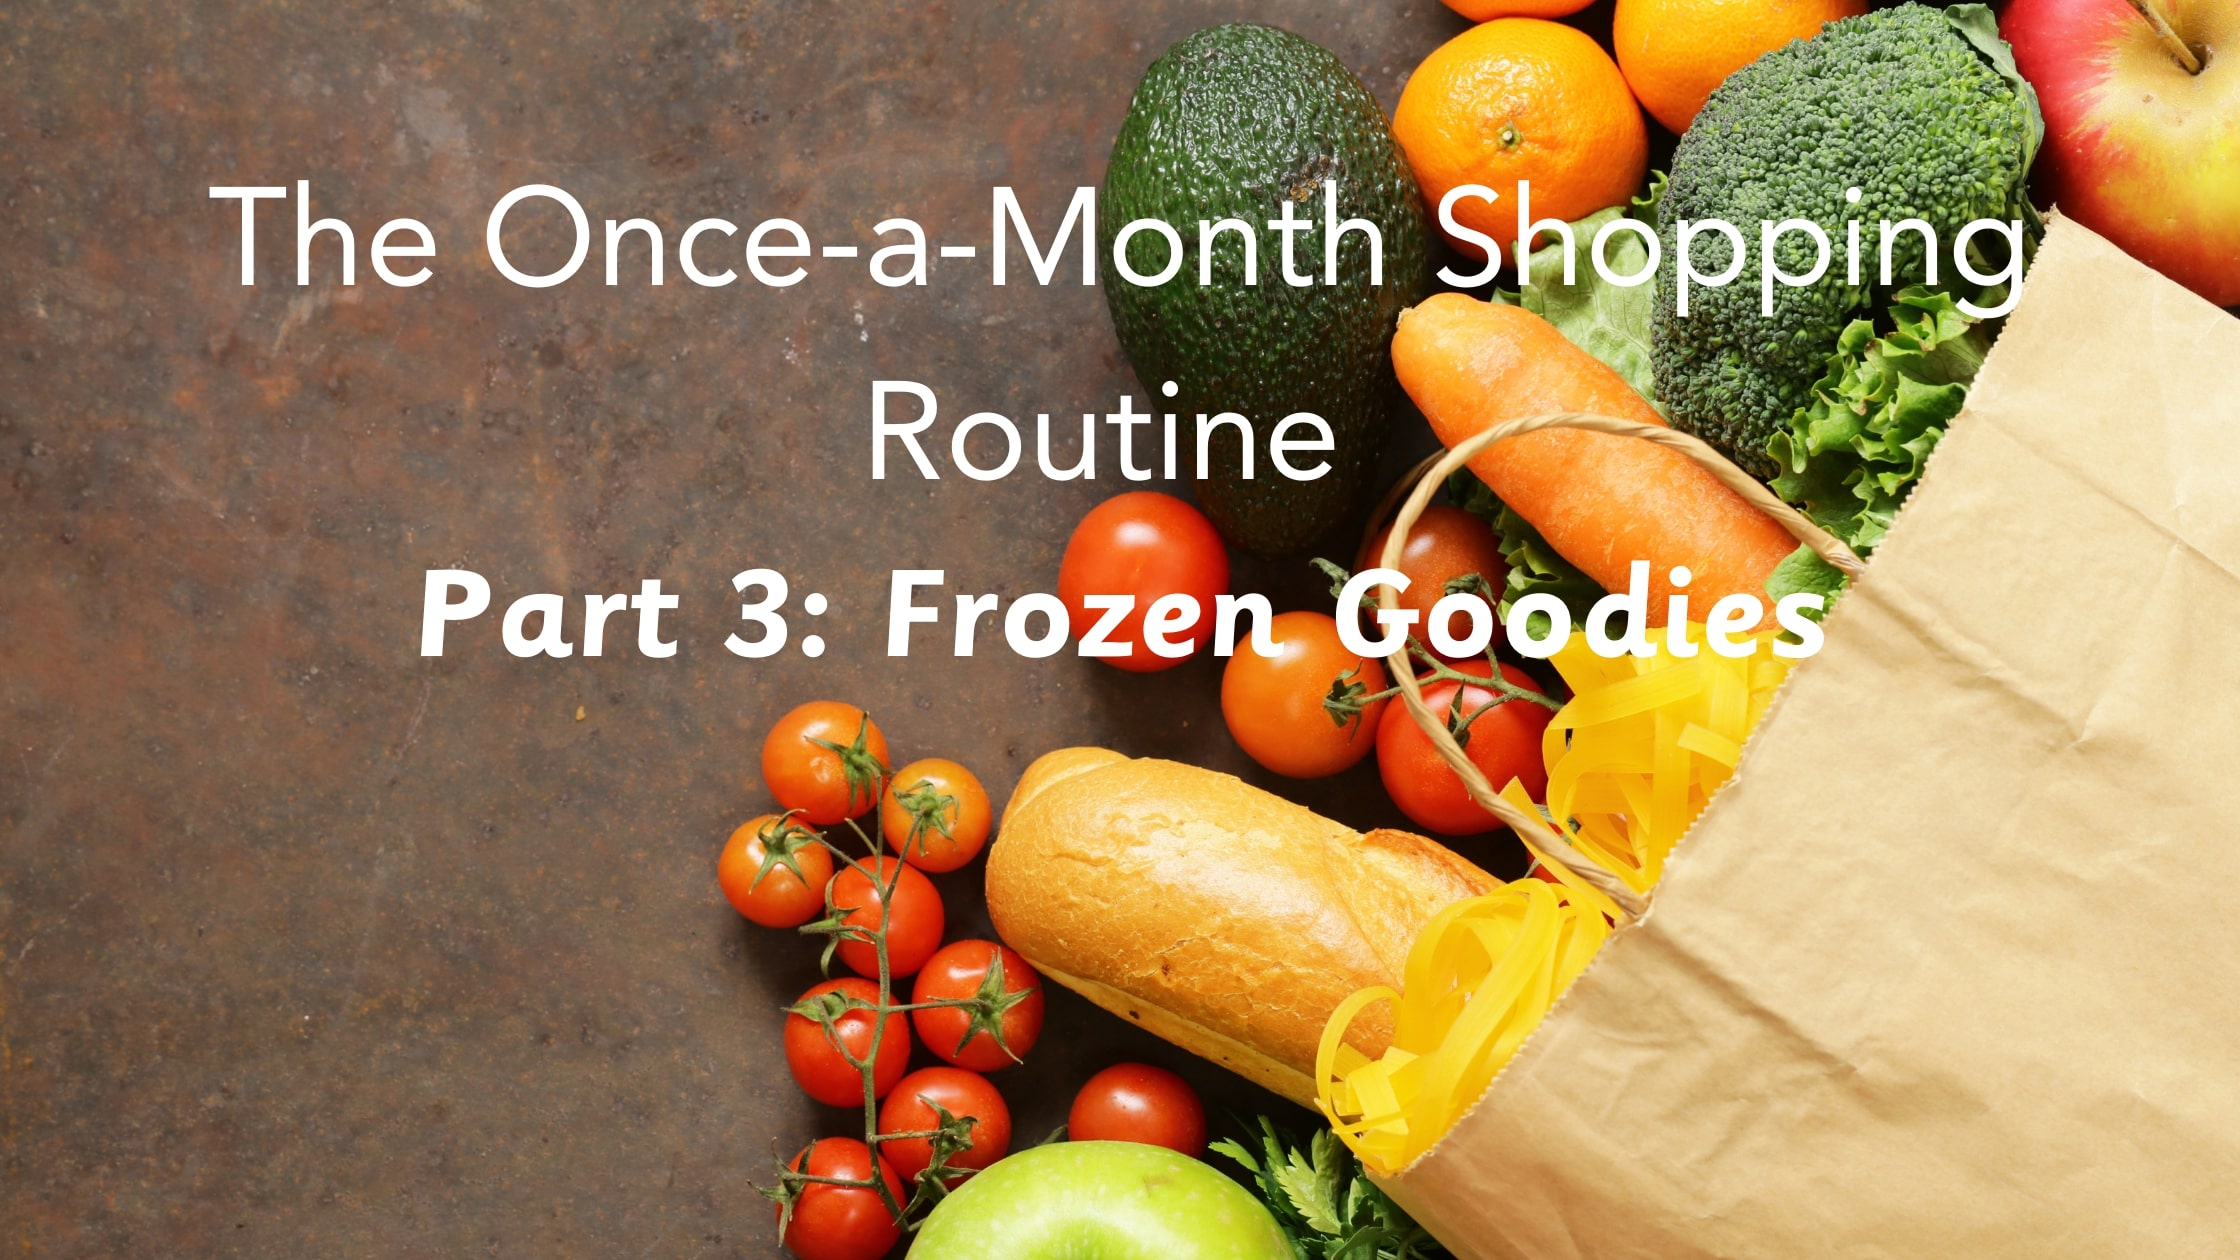 The Once-a-month Shopping Routine